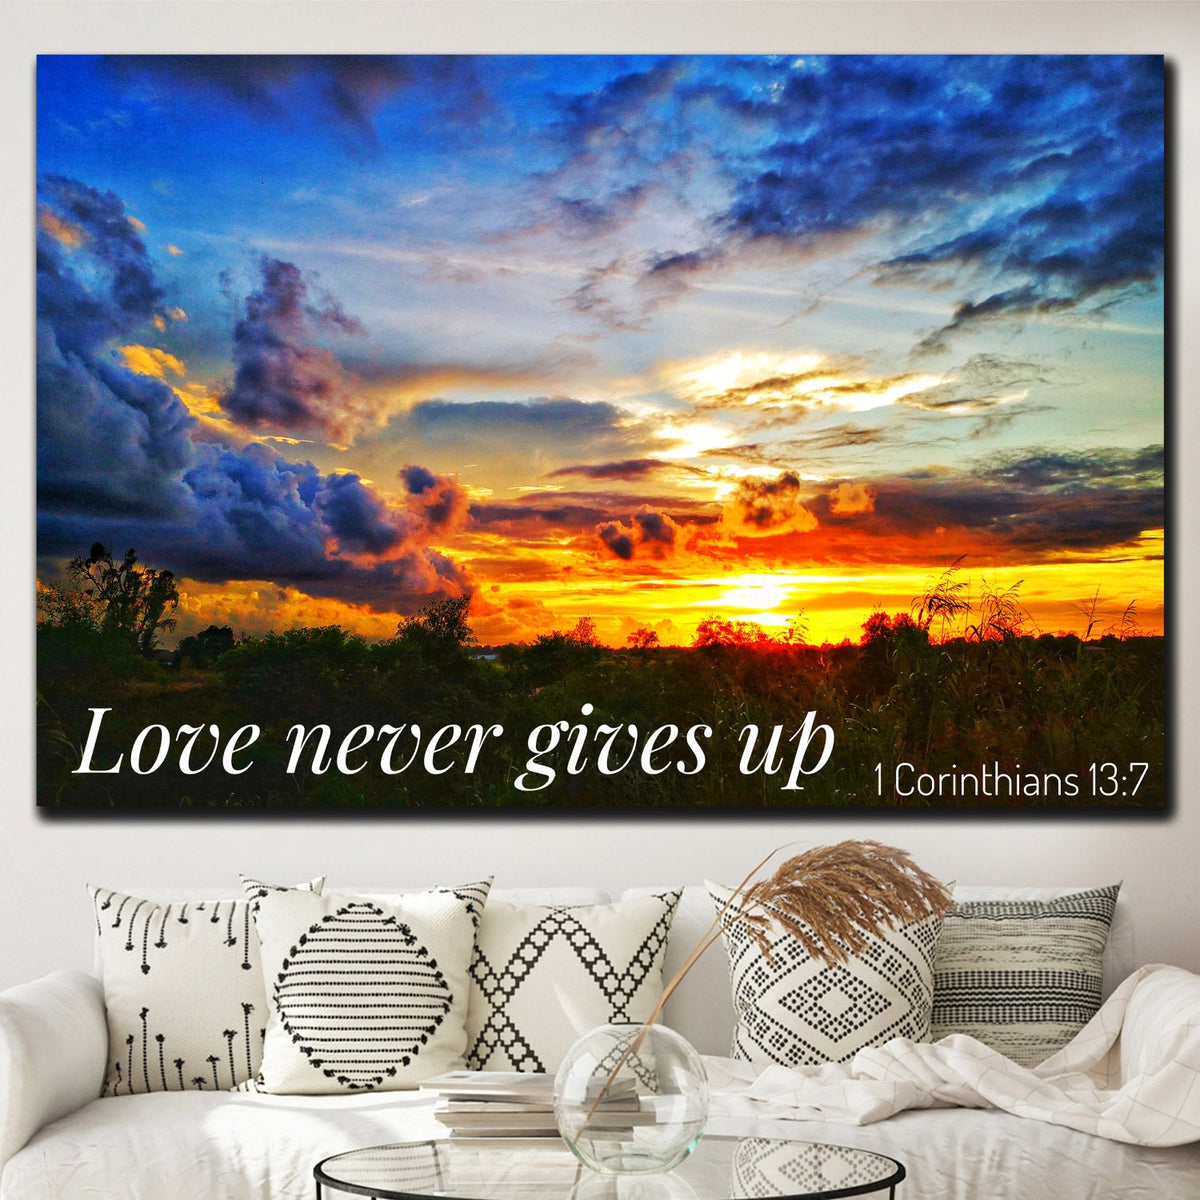 https://cdn.shopify.com/s/files/1/0387/9986/8044/products/LoveNeverGivesUpCanvasArtprintStretched-1.jpg